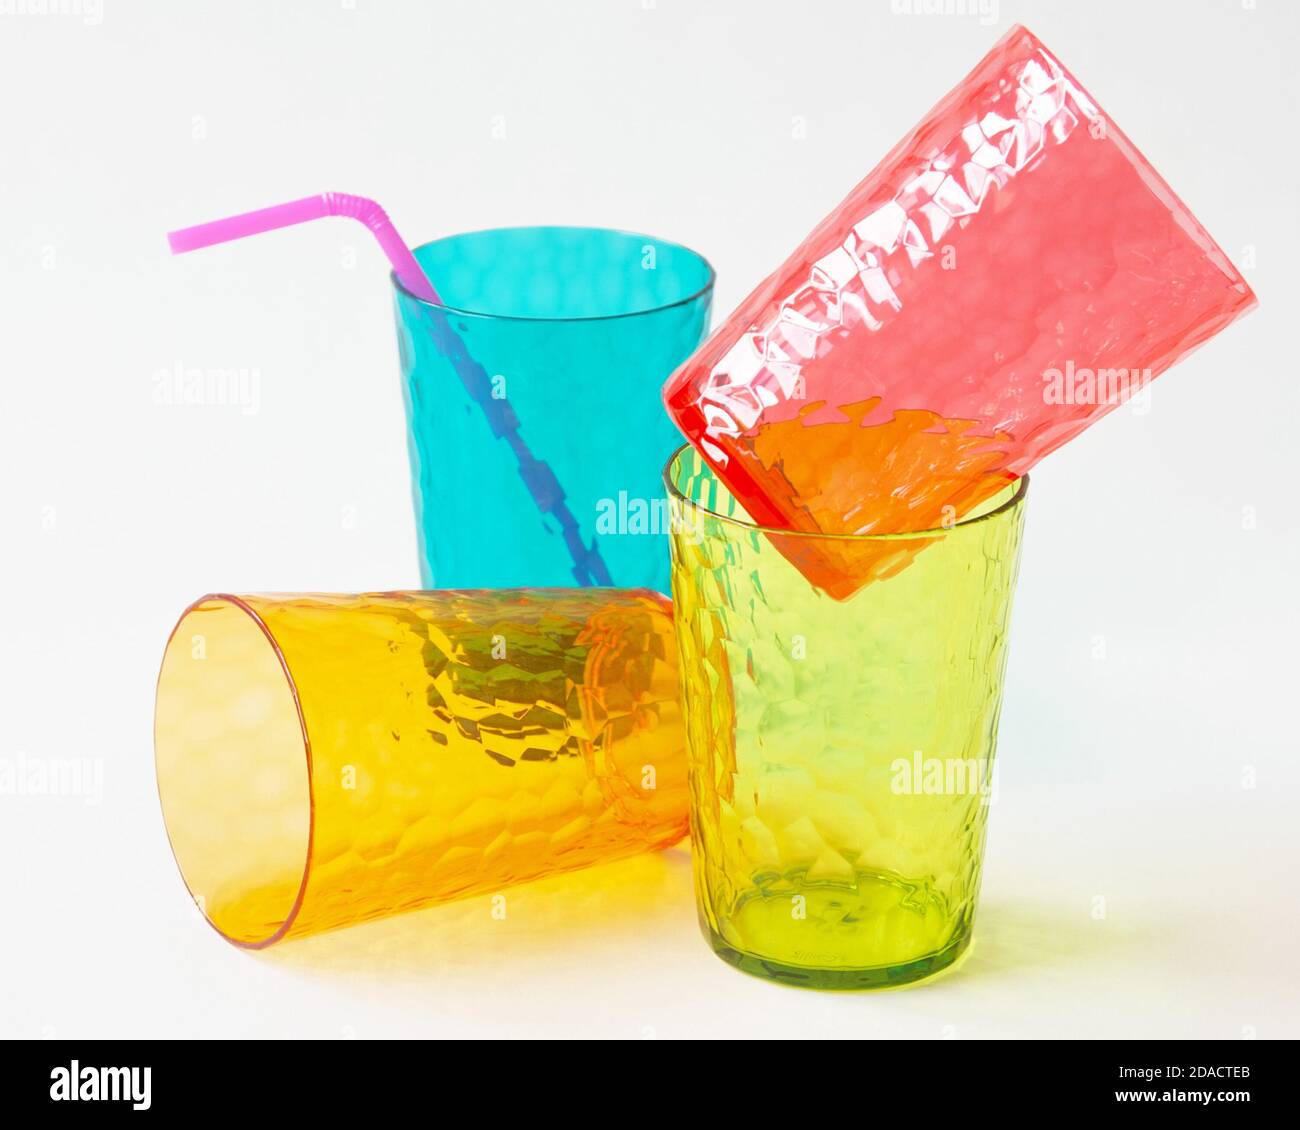 Colorful plastic cups on white background. Stock Photo